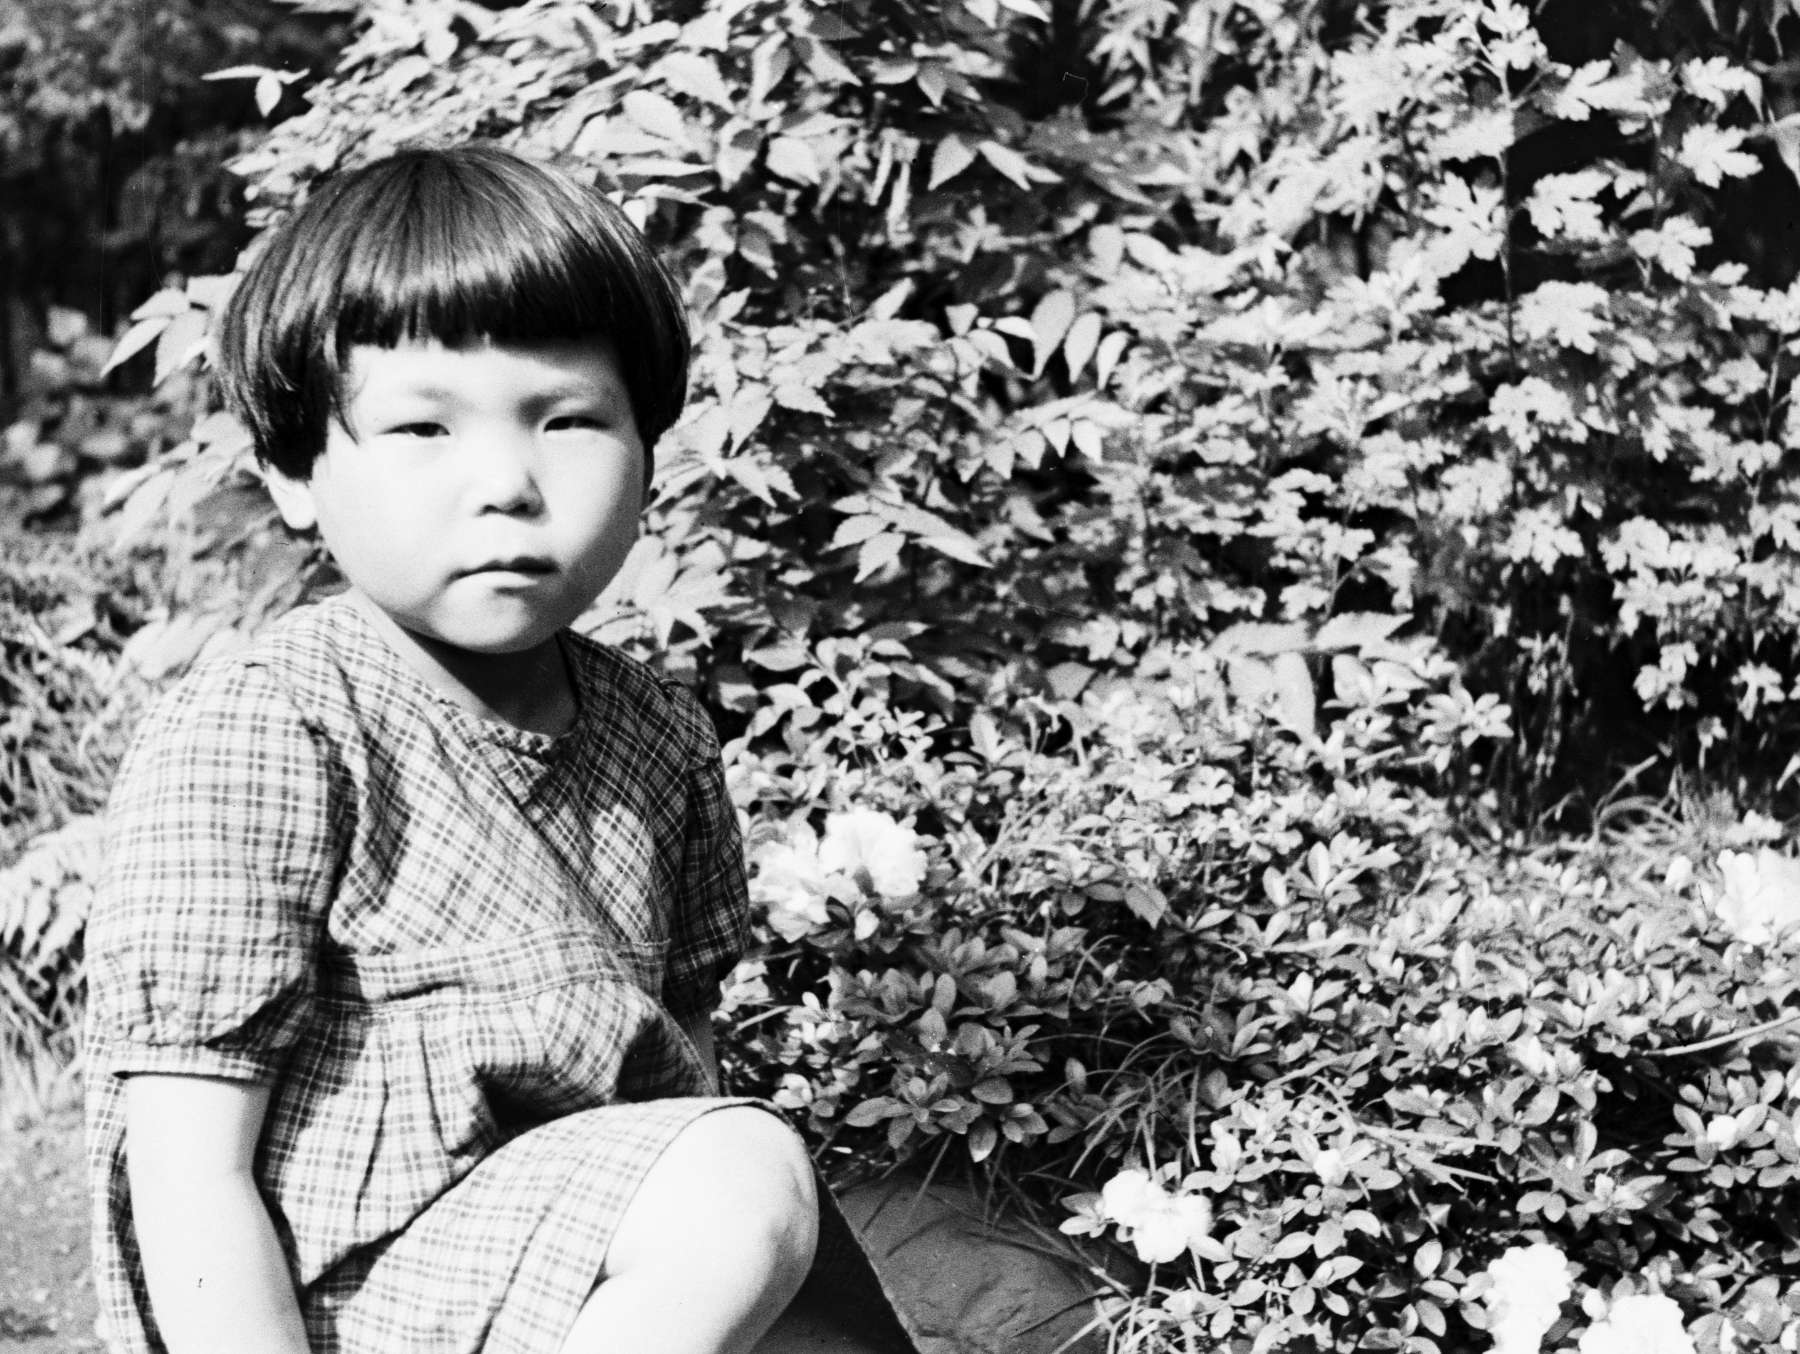 A five-year-old Masako, hair cut in a short bob, wearing a checked dress, kneels on the grass before a flowering bush.